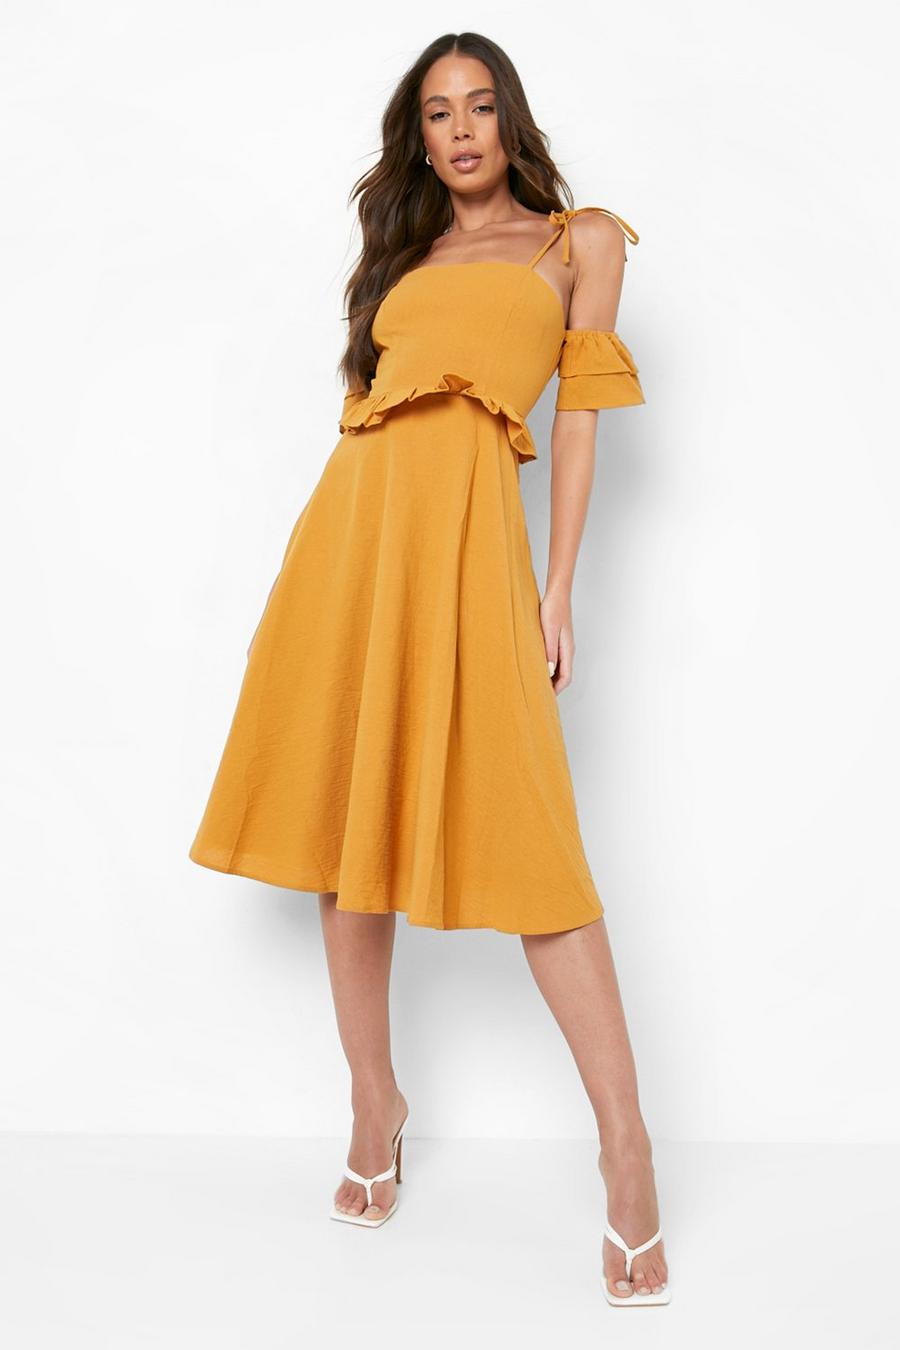 Mustard yellow Strappy Off The Shoulder Midi Skater Dress